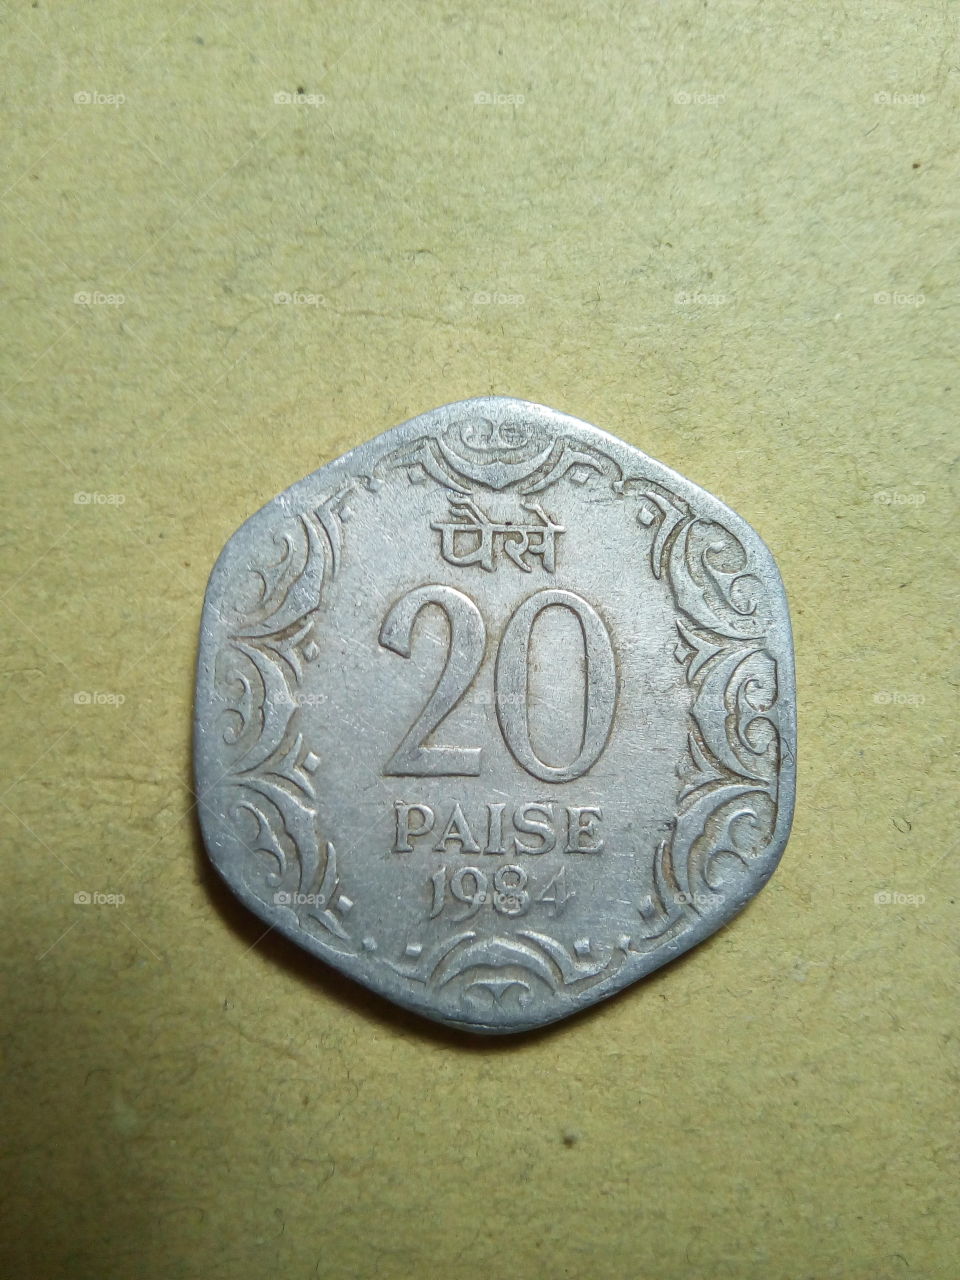 A coin of twenty paise- 1/5 share of Indian Rupee issued by Government of India in 1984.